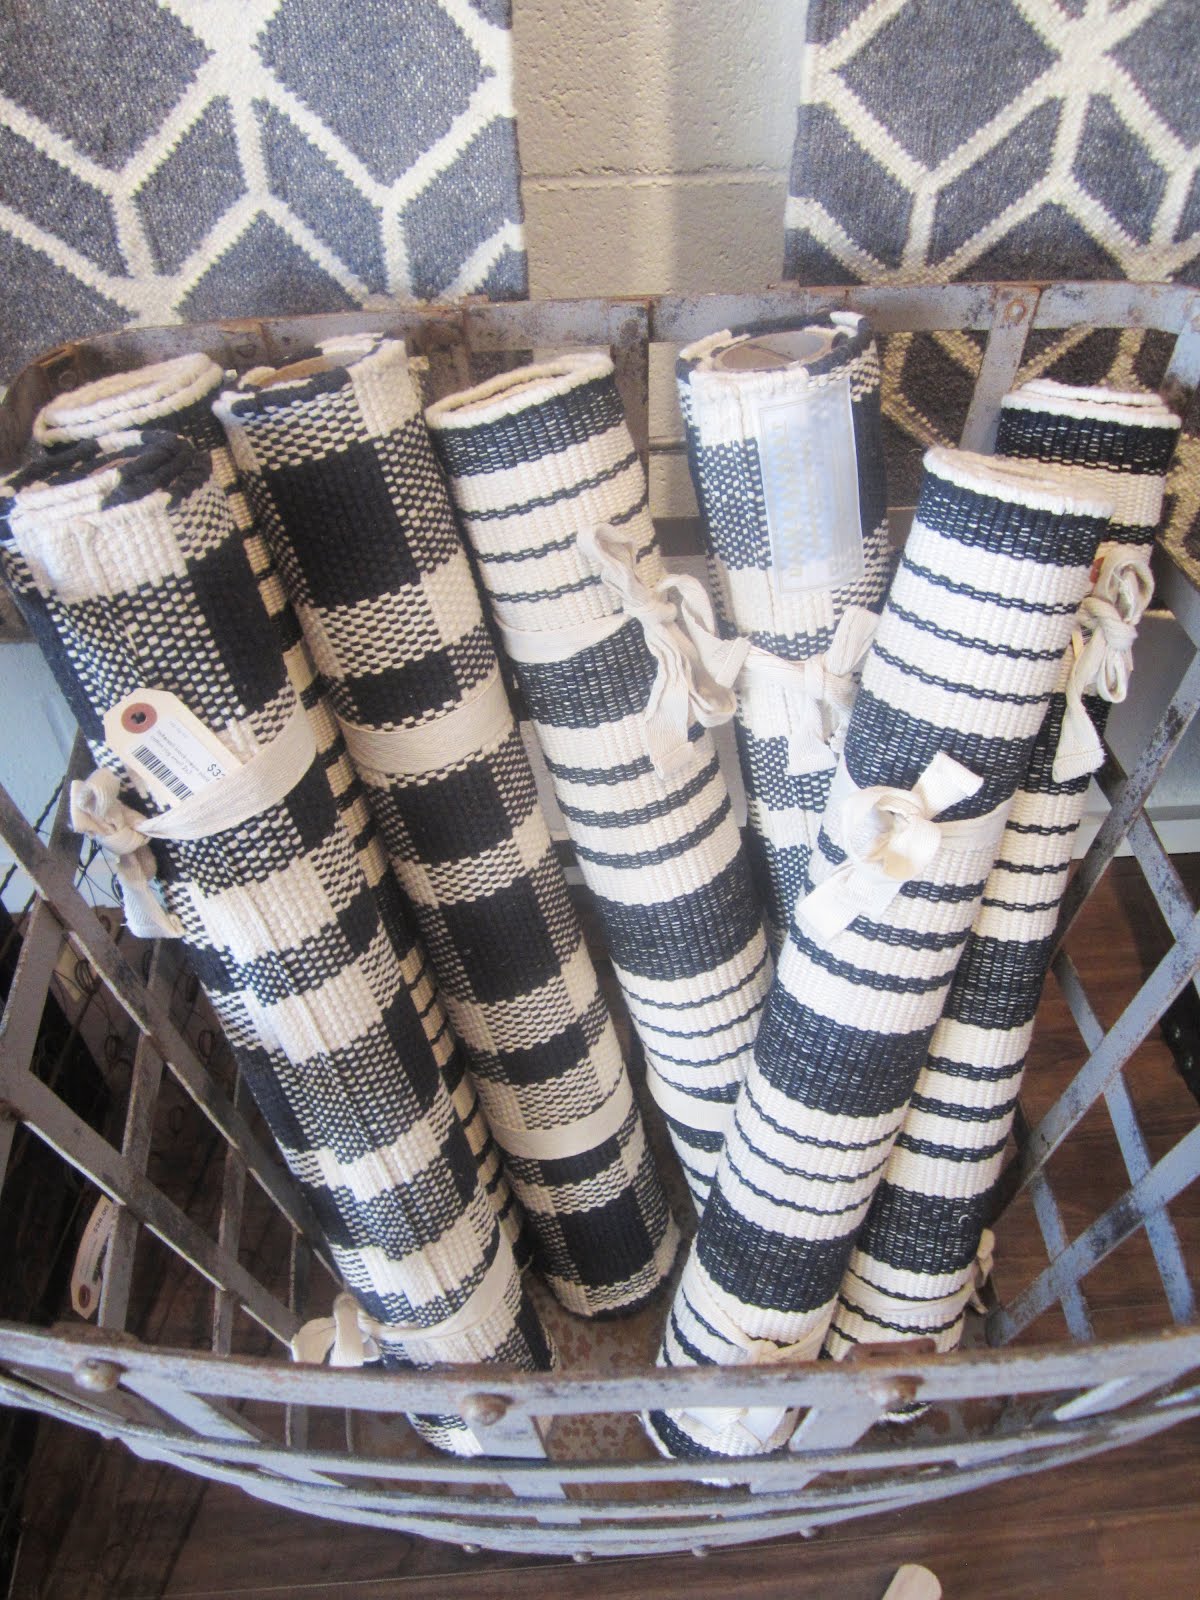 Lots of flat weave cotton rugs in navy and white plaids and stripes